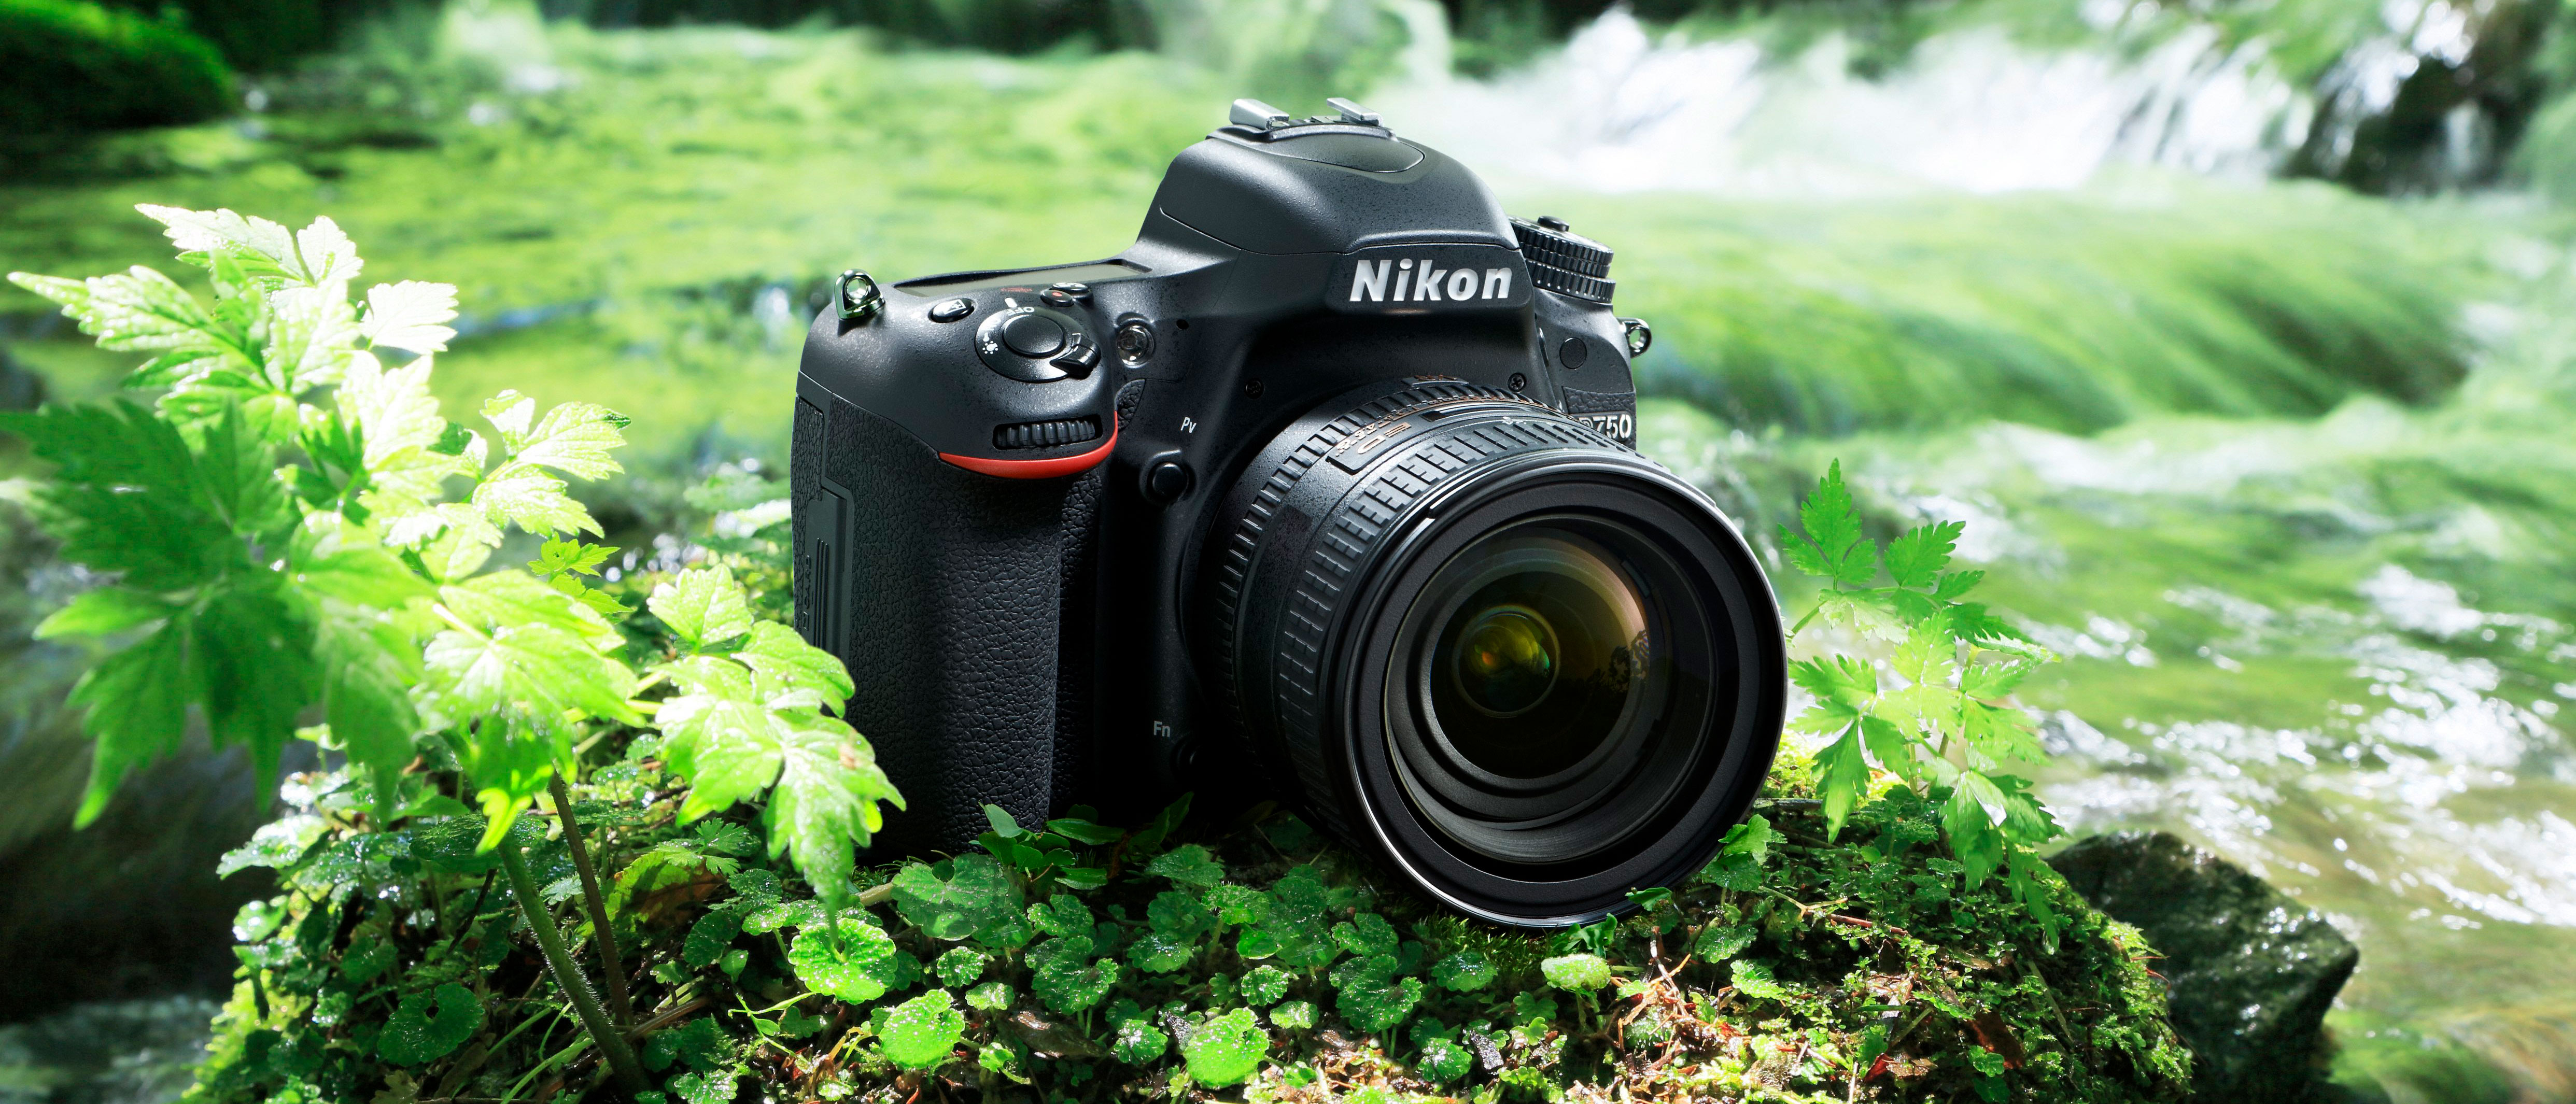 Nikon D750 24.3MP DSLR Camera Online at Lowest Price in India